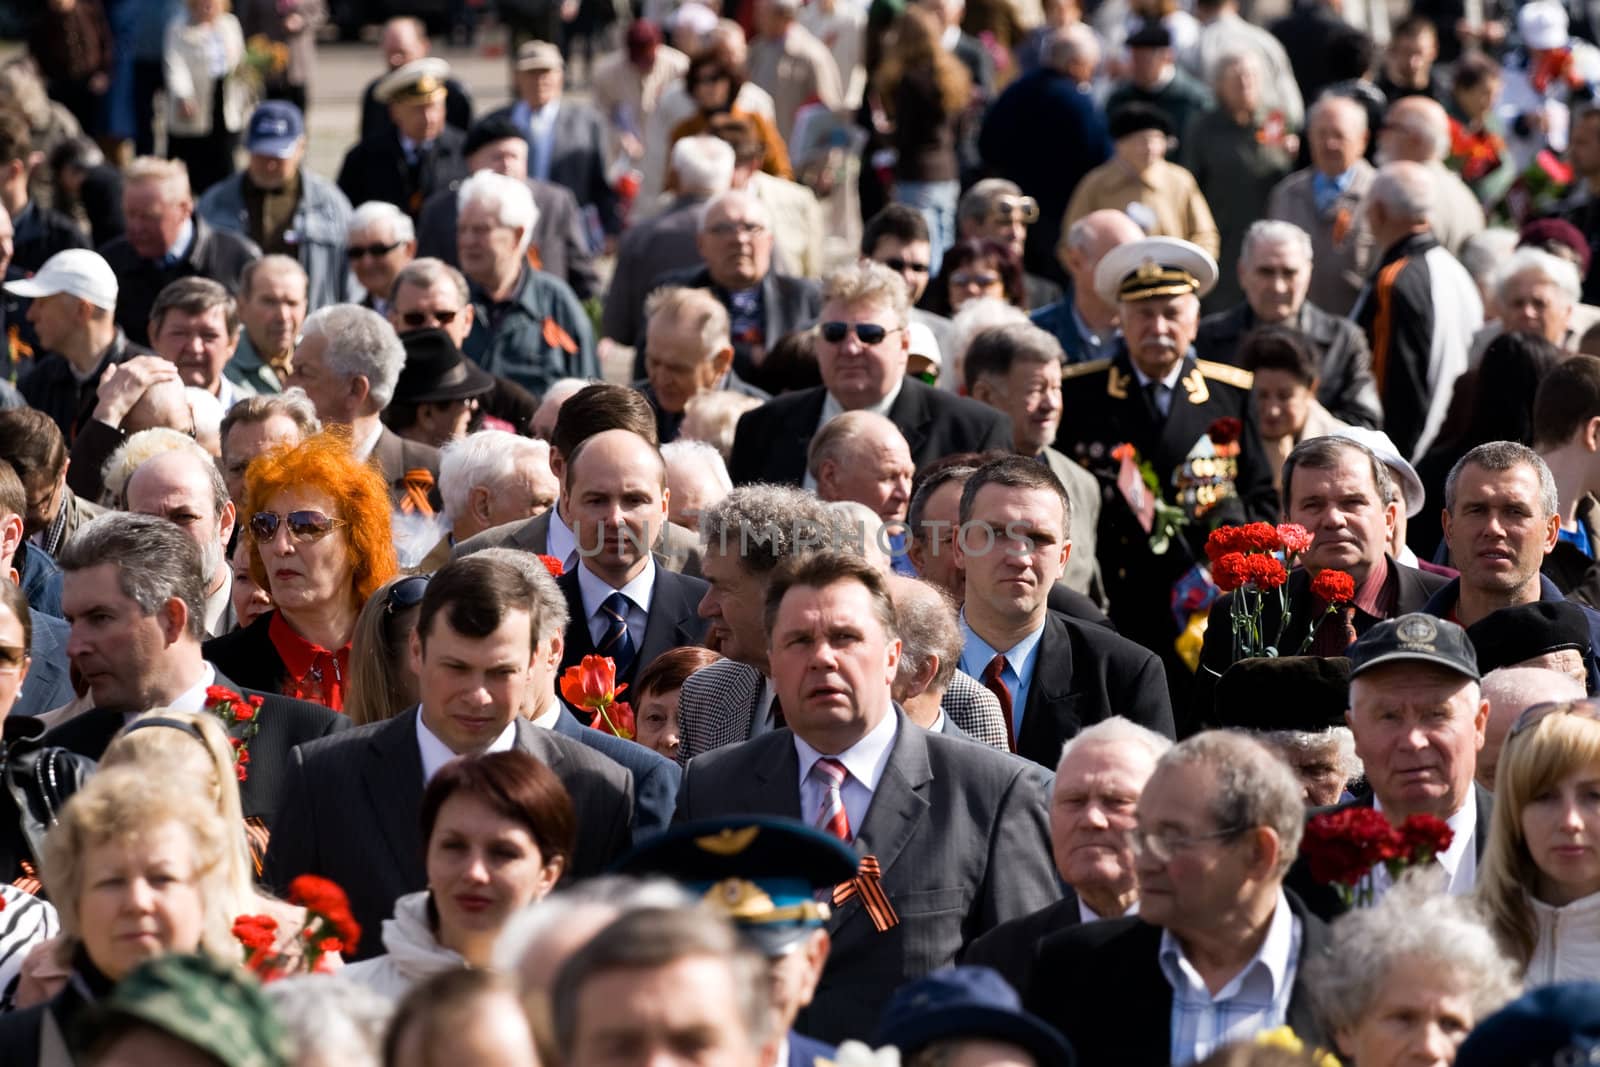 Celebration of Victory Day (Eastern Europe) in Riga by ints